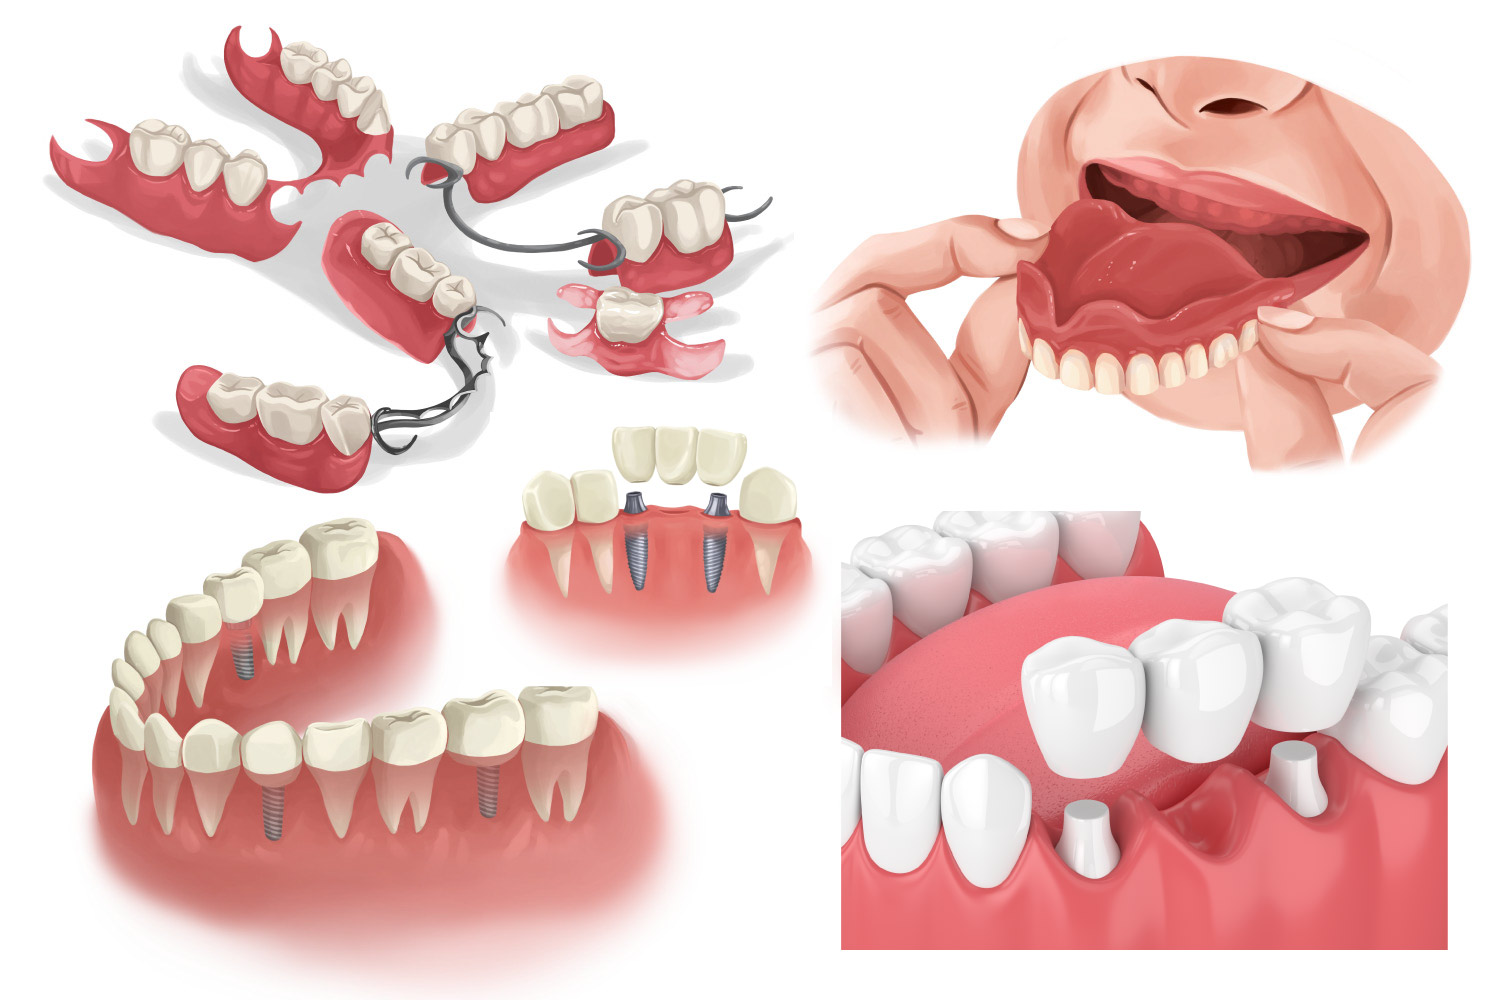 Drawings of tooth replacement options: dentures, bridges, and dental implants